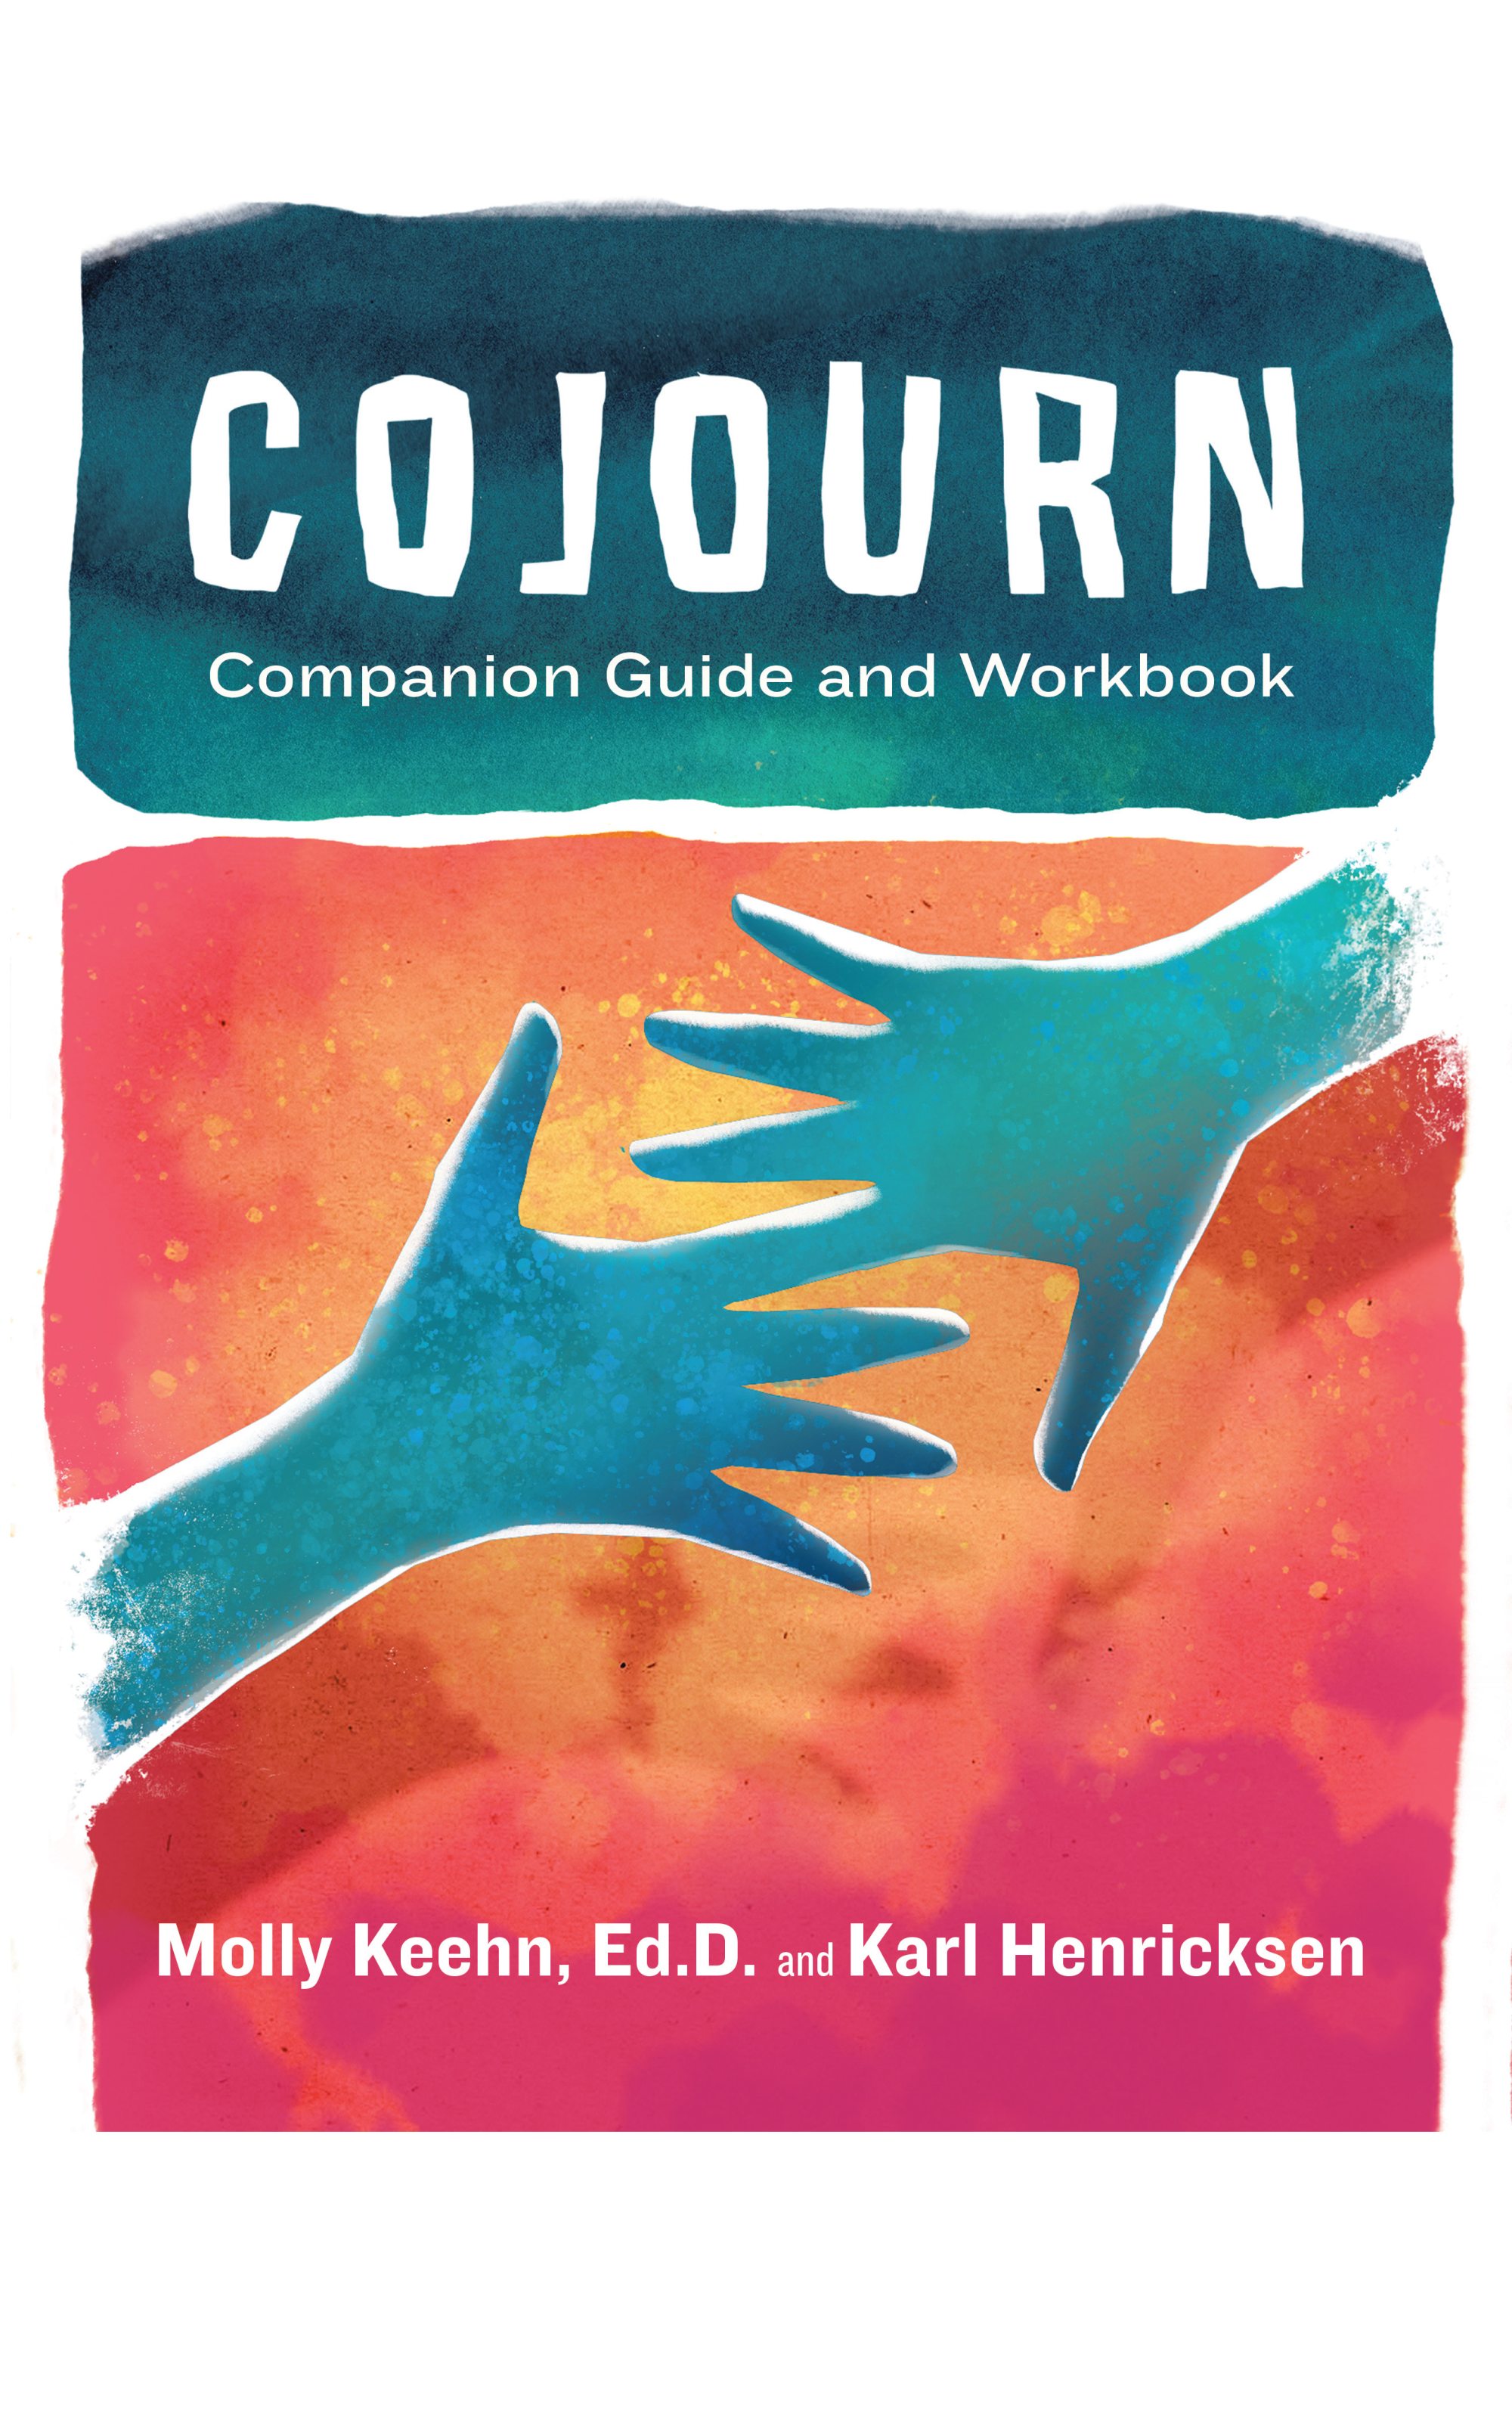 CoJourn Companion Guide and Workbook cover depicting two hands that are reaching towards each other and share a pointer finger.